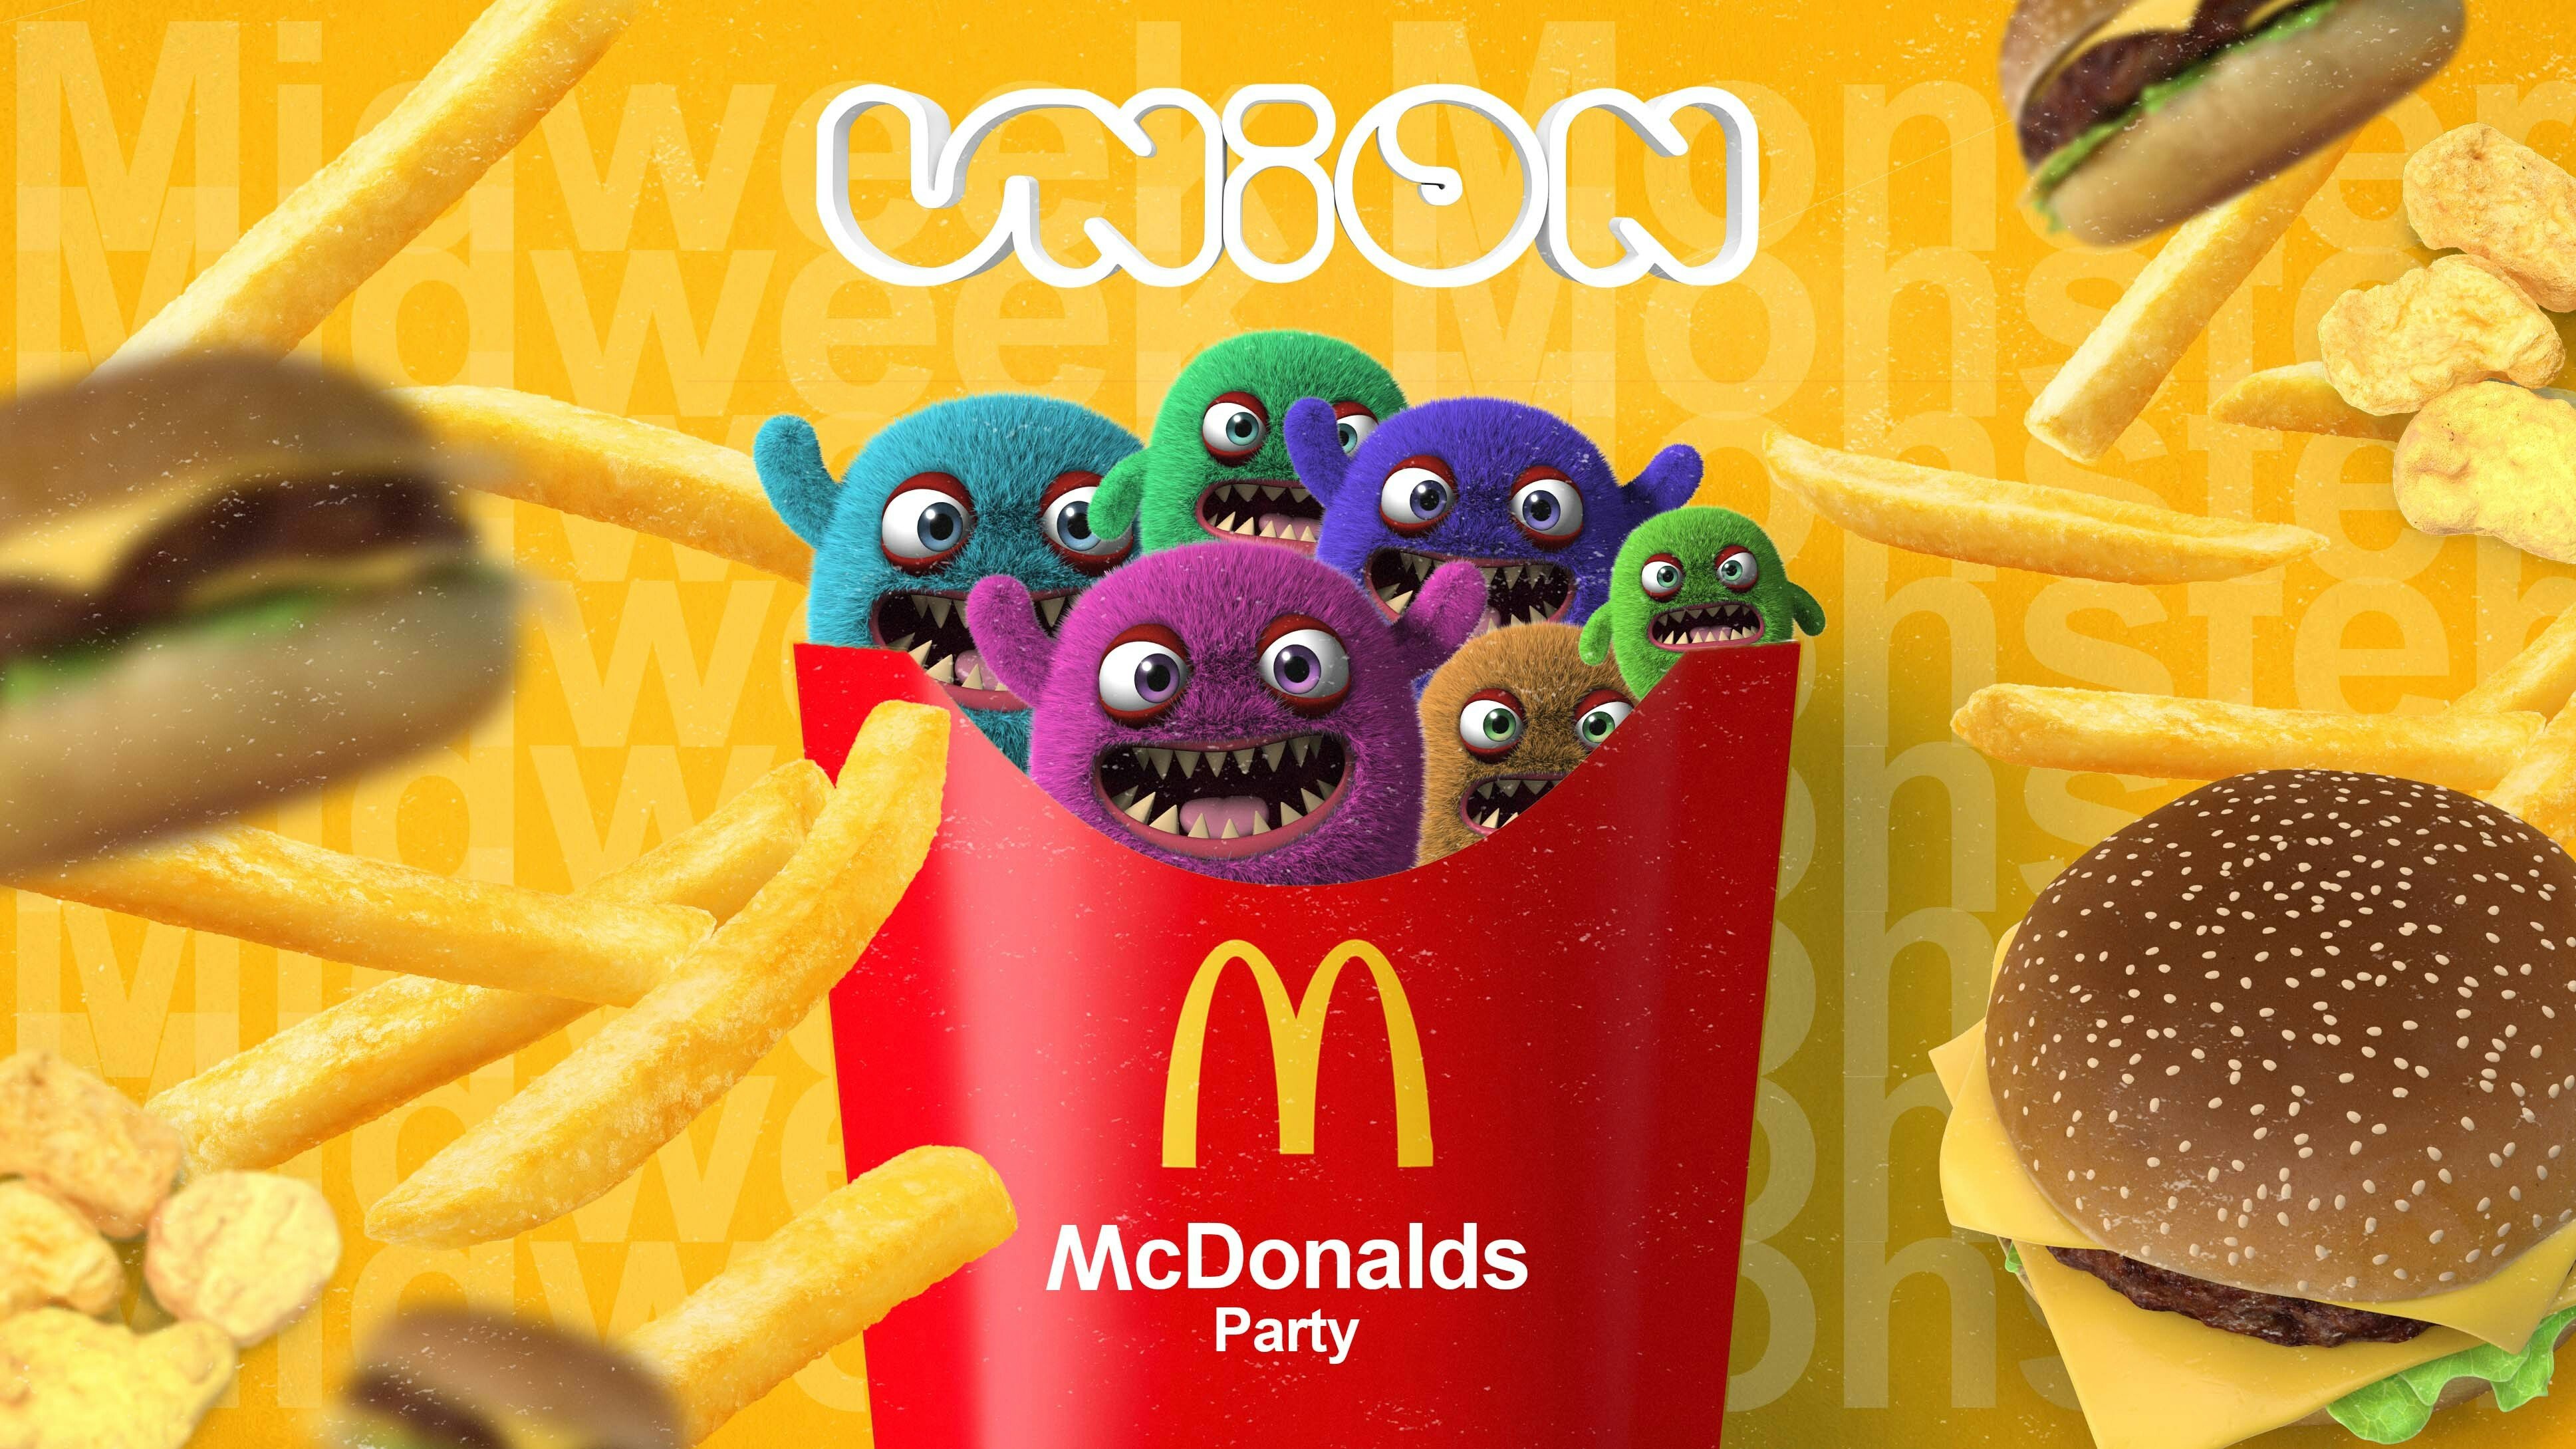 UNION TUESDAY’S PRESENTS THE MCDONALDS PARTY 🍔